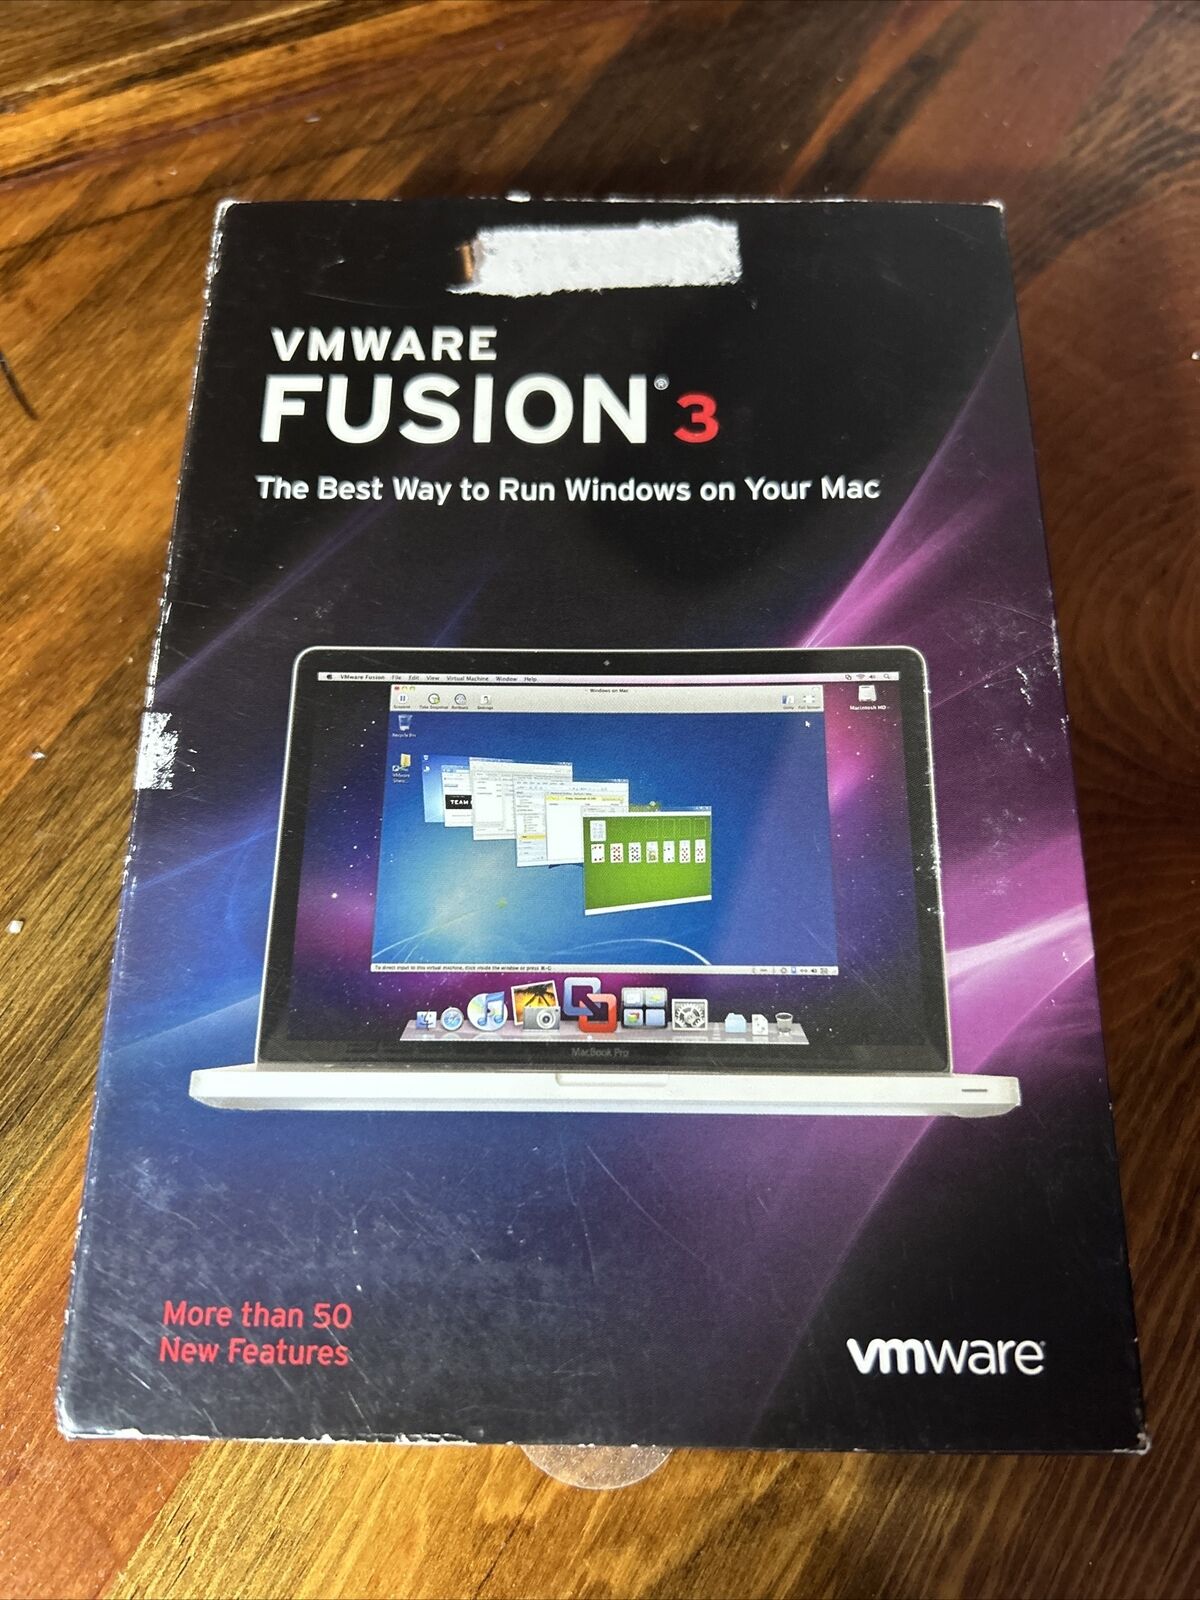 VMware Fusion 3 Windows experience on the Mac FUS3-ENG-M-CP